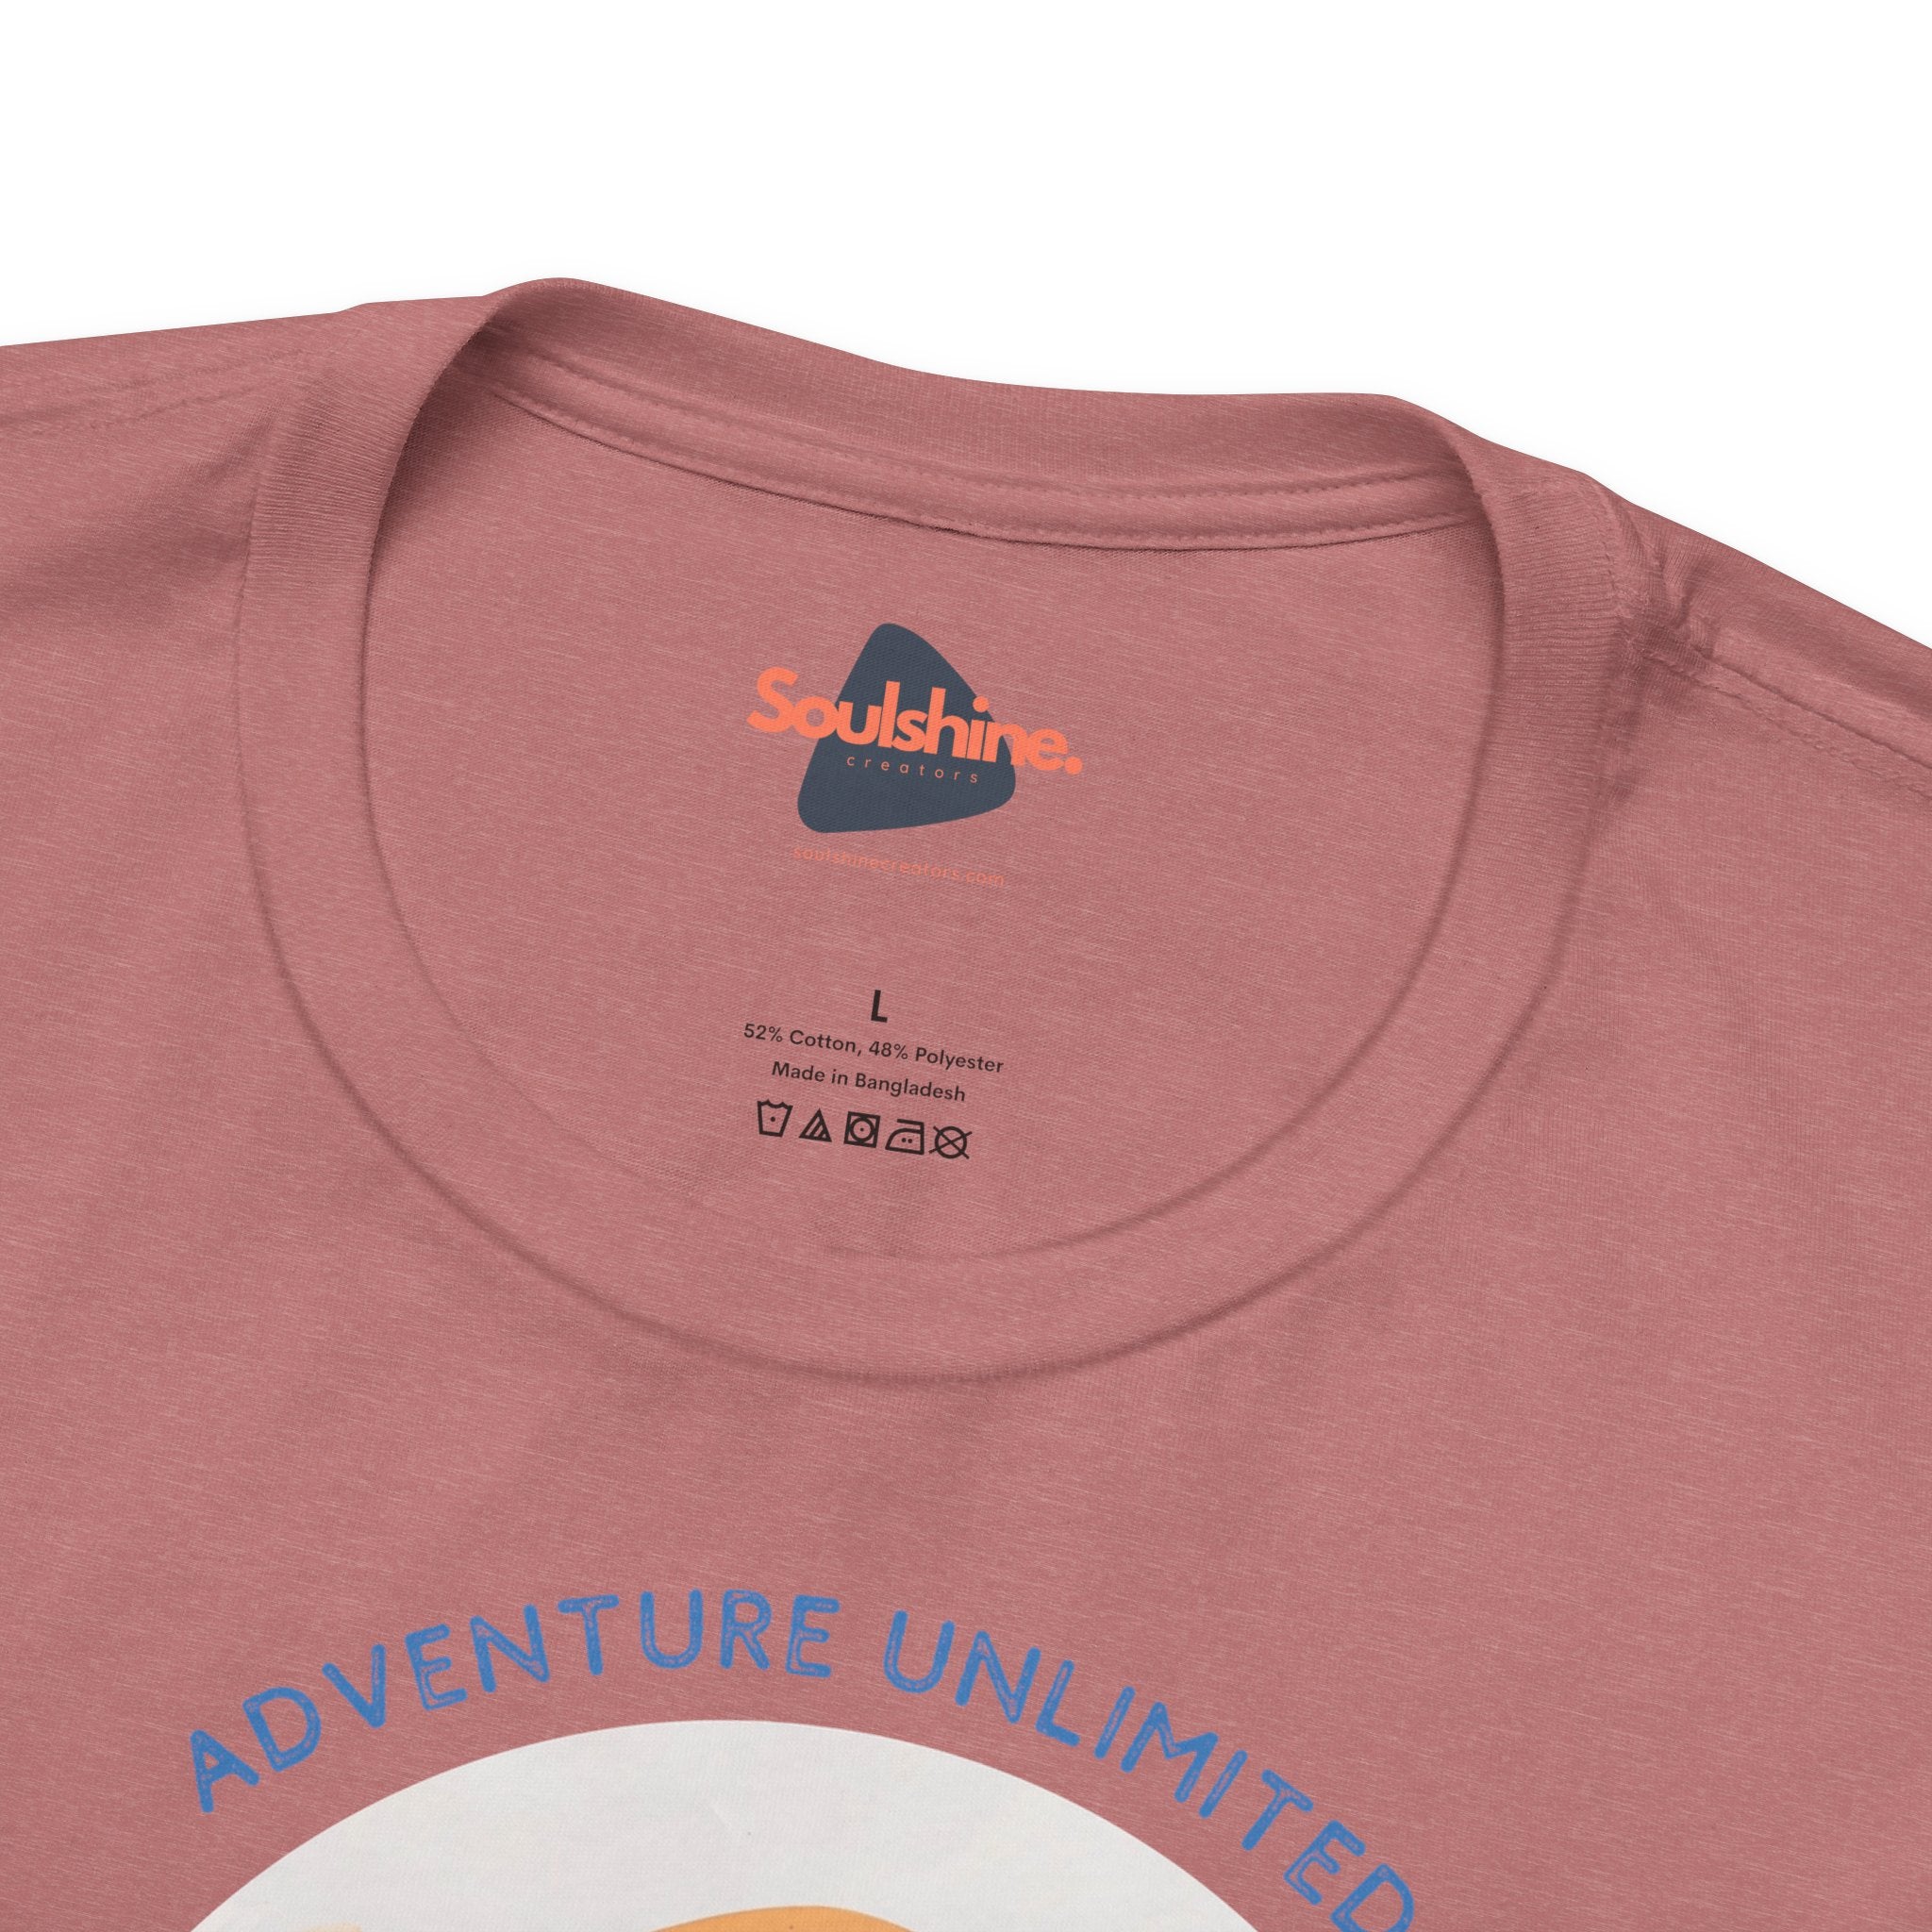 Pink bird graphic on Adventure Unlimited surfing t-shirt by Soulshinecreators, Bella & Canvas - EU, direct-to-garment printed item